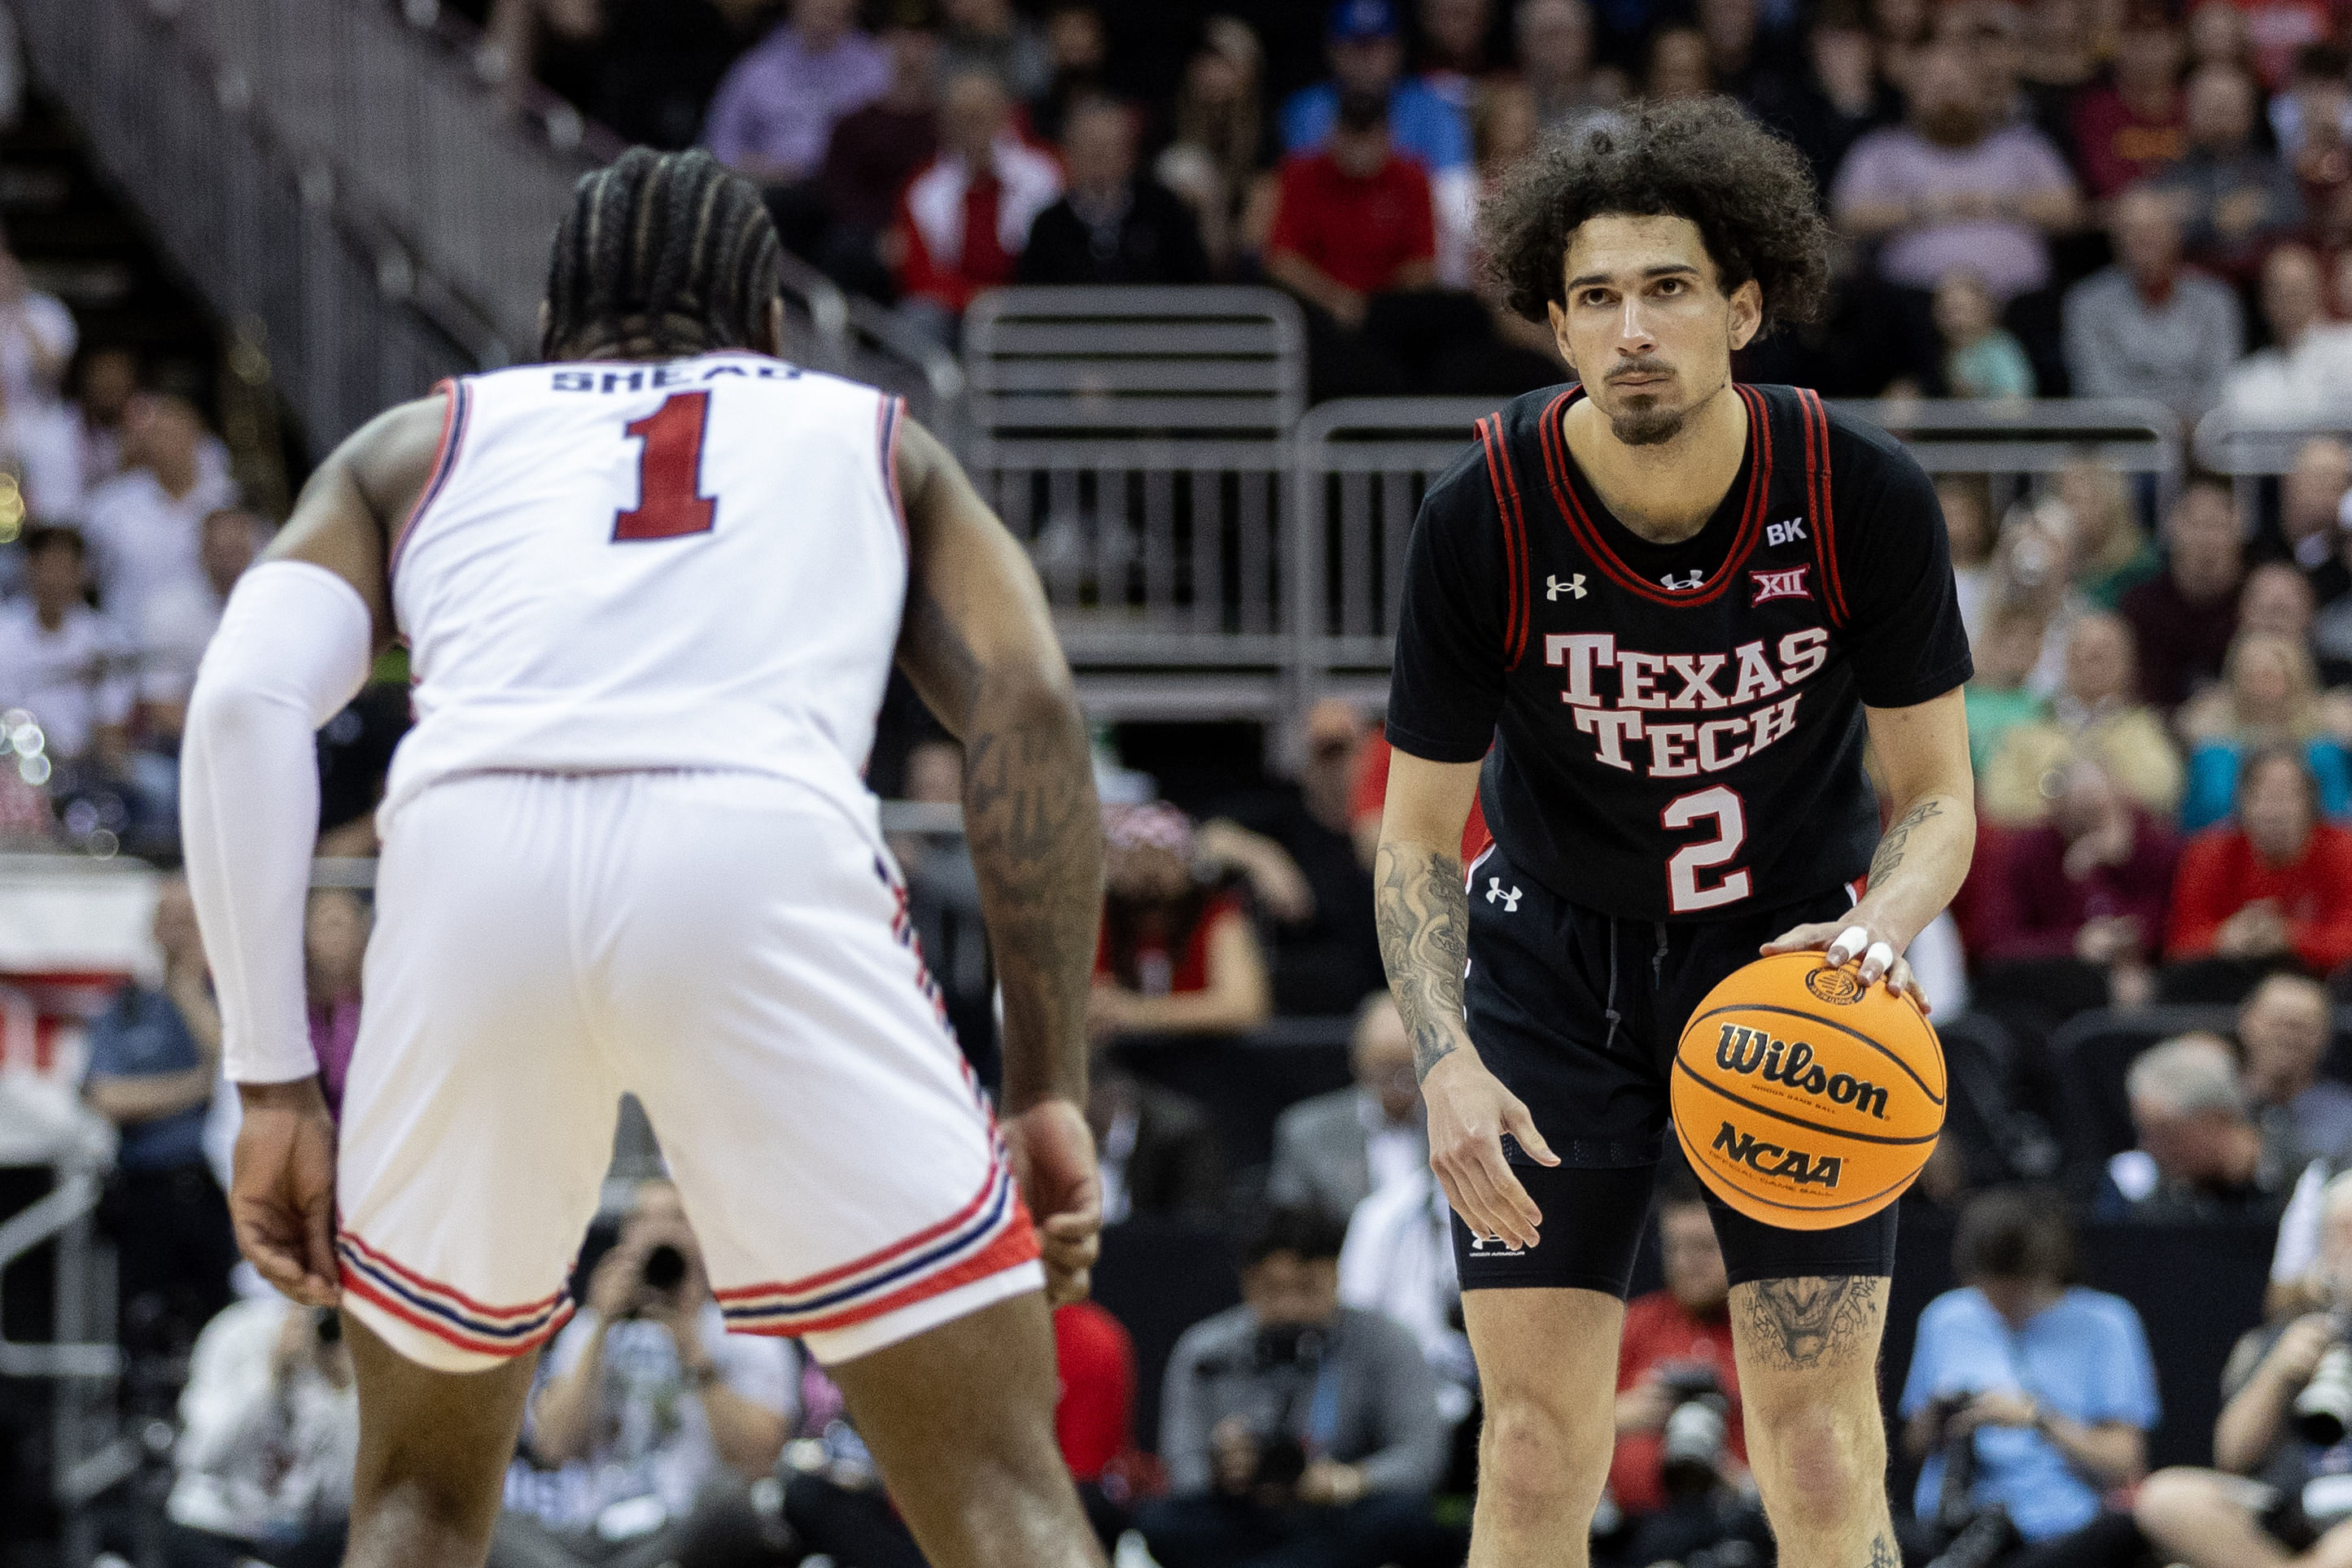 Pop Isaacs led Texas Tech with averages of 15.8 ppg, 3.2 rpg and 3.5 apg in 34 games.